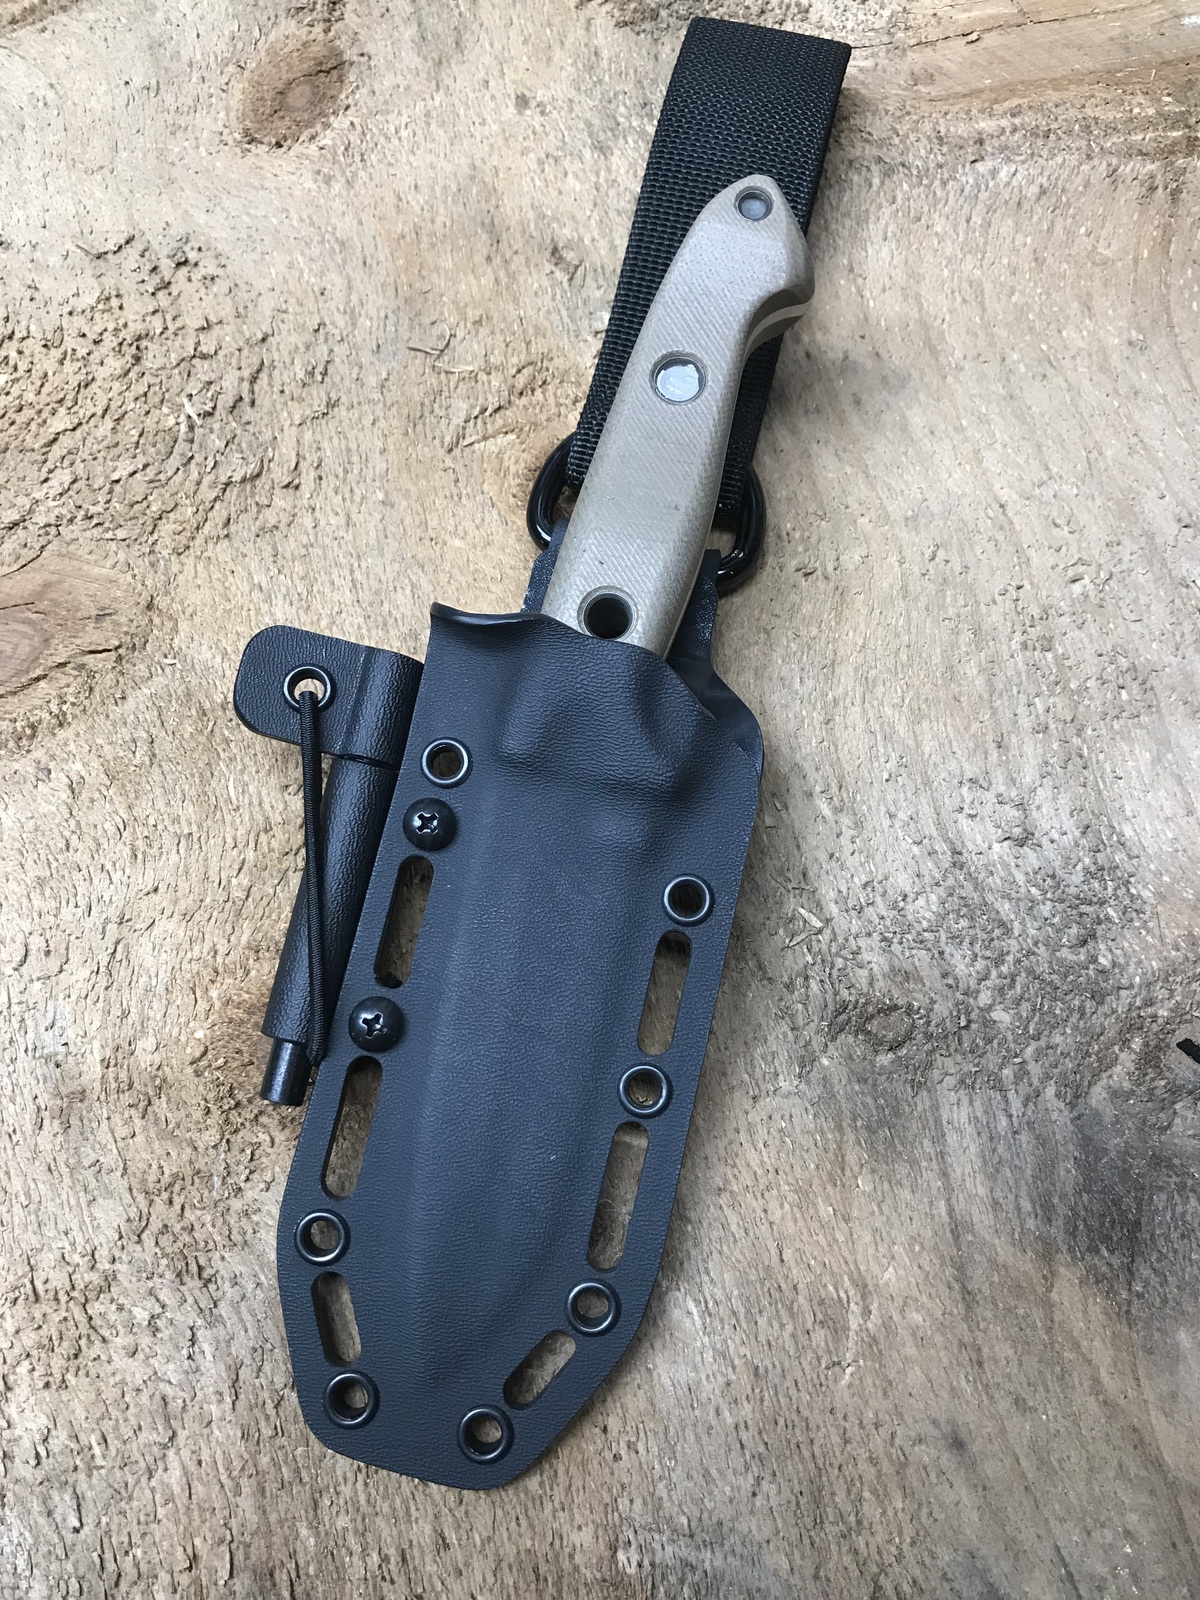 Grizzly Outdoors kydex knife sheaths